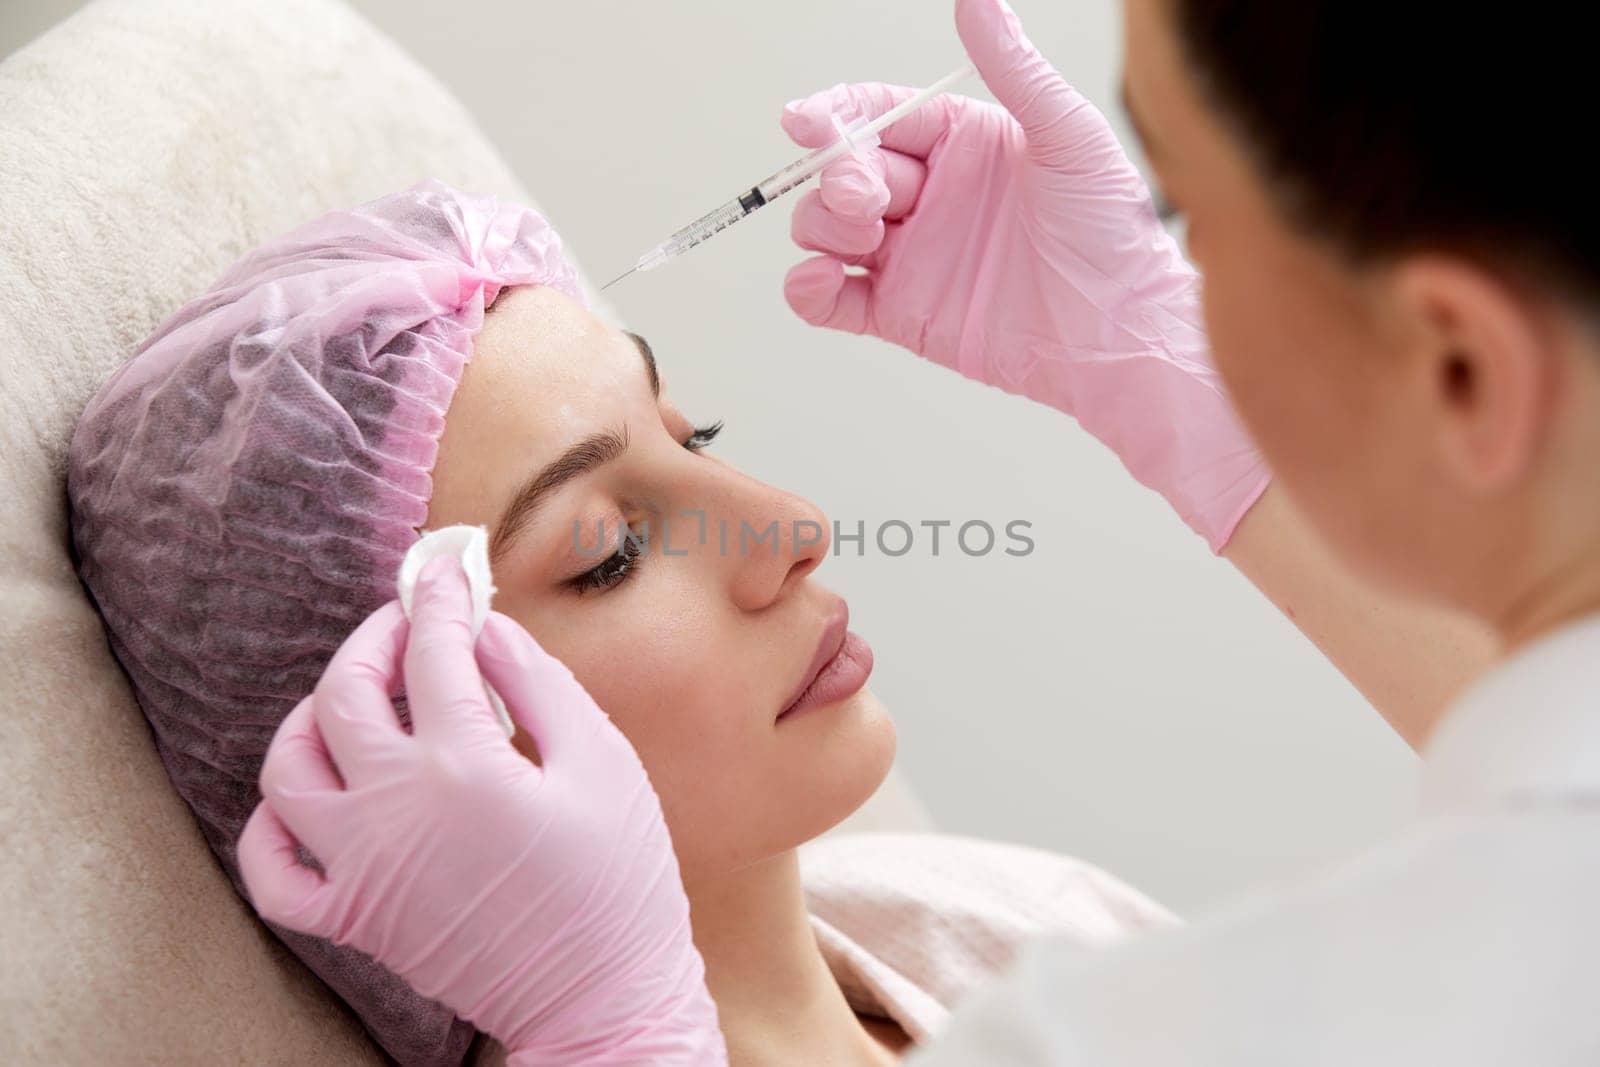 Cosmetologist performs the lift procedure by injecting beauty injections. Doctor injecting hyaluronic acid as facial rejuvenation treatment by Mariakray